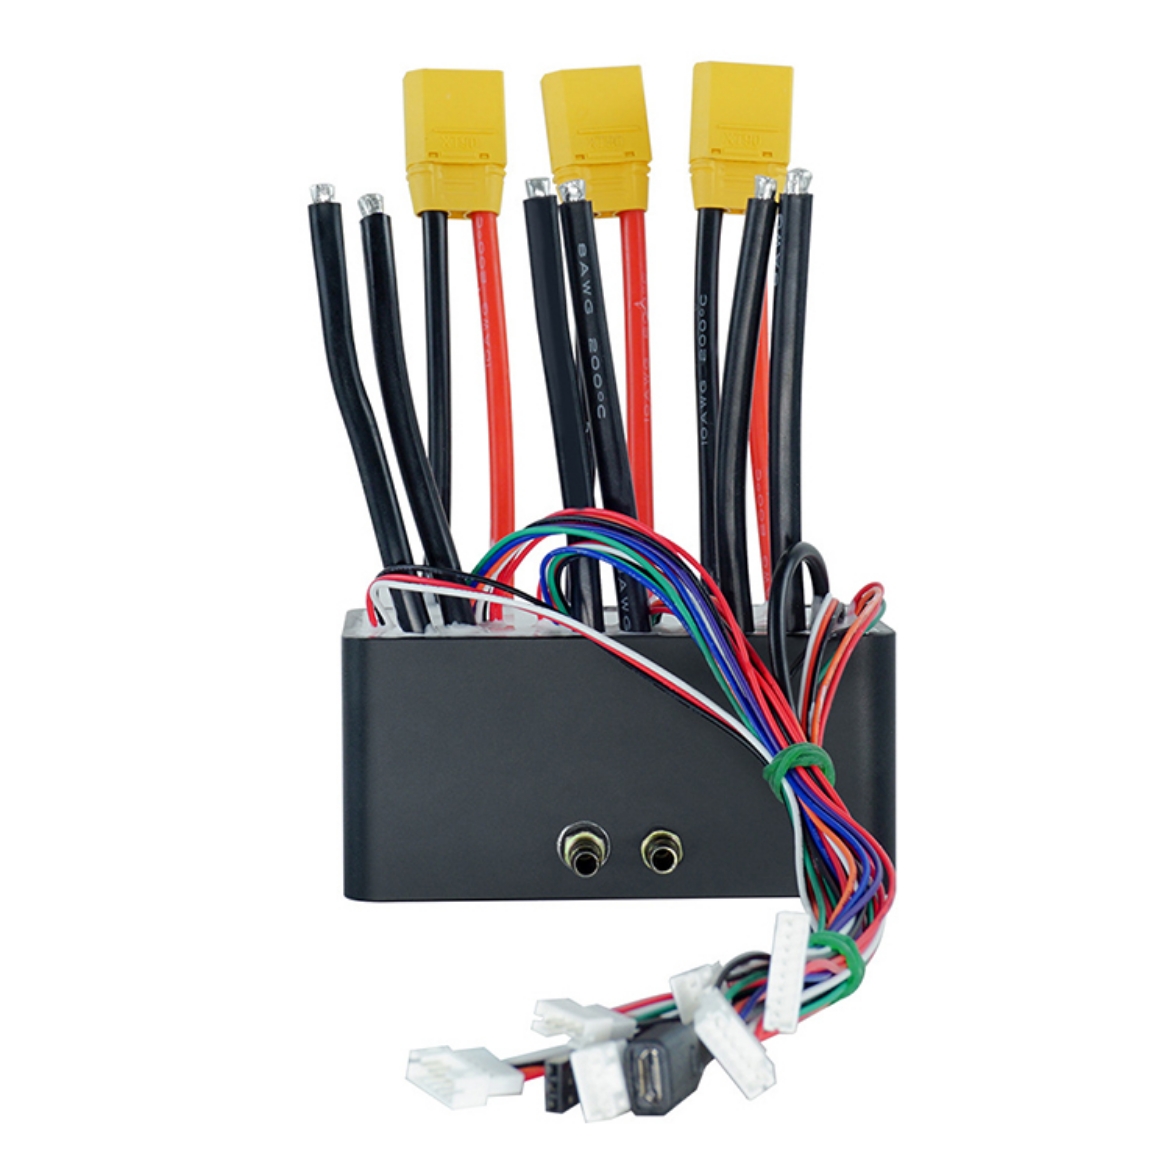 200A 3-16S Brushless ESC Controller, IP67 Waterpoof